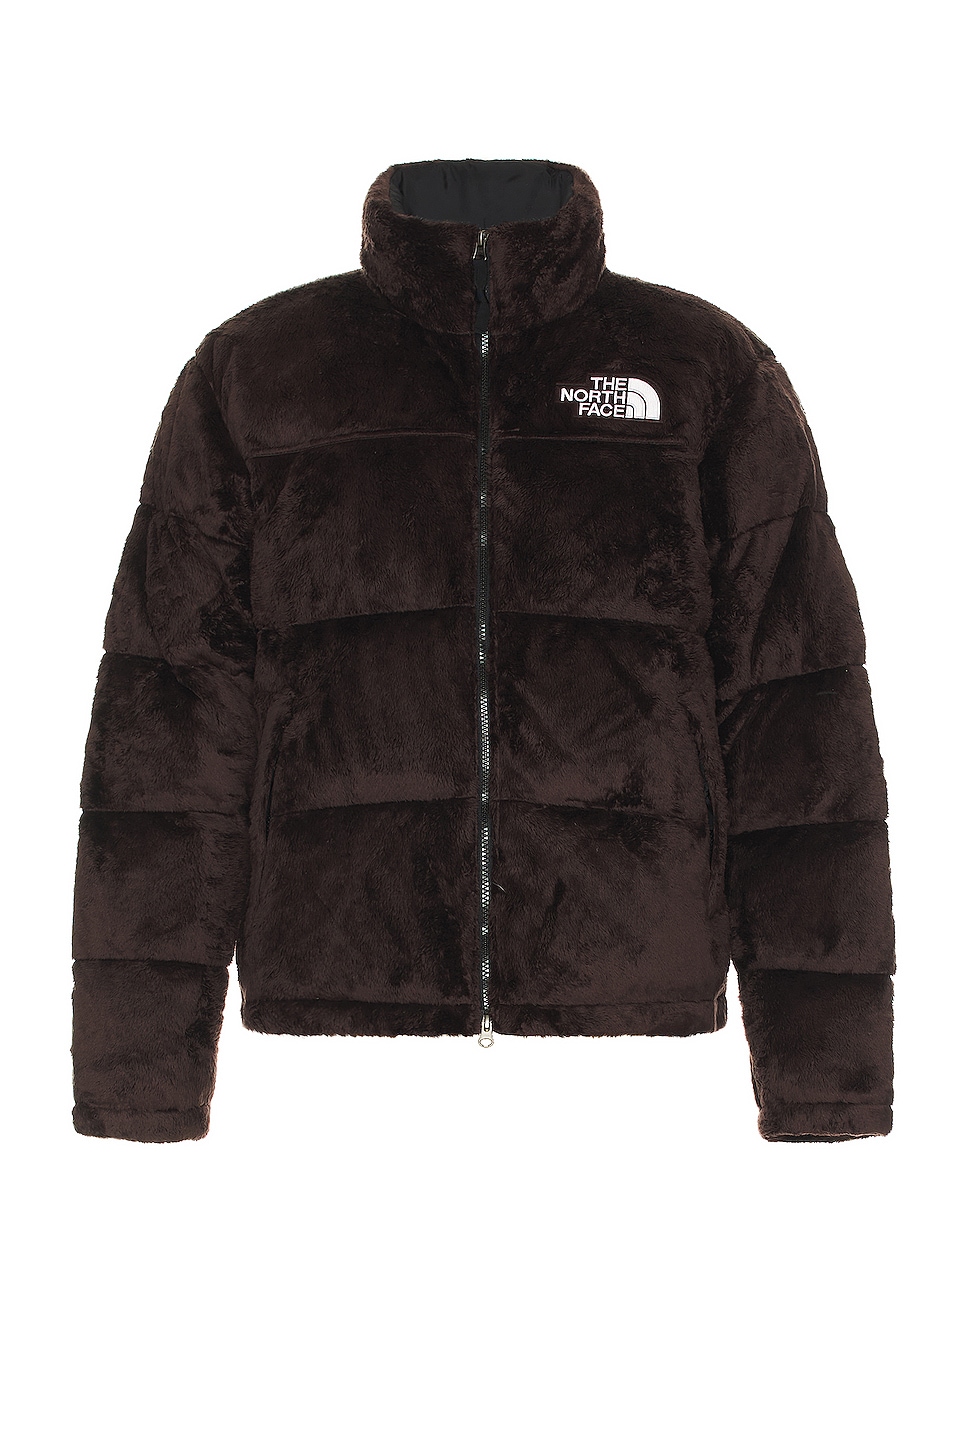 Image 1 of The North Face Versa Velour Nuptse In Coal Brown in Coal Brown